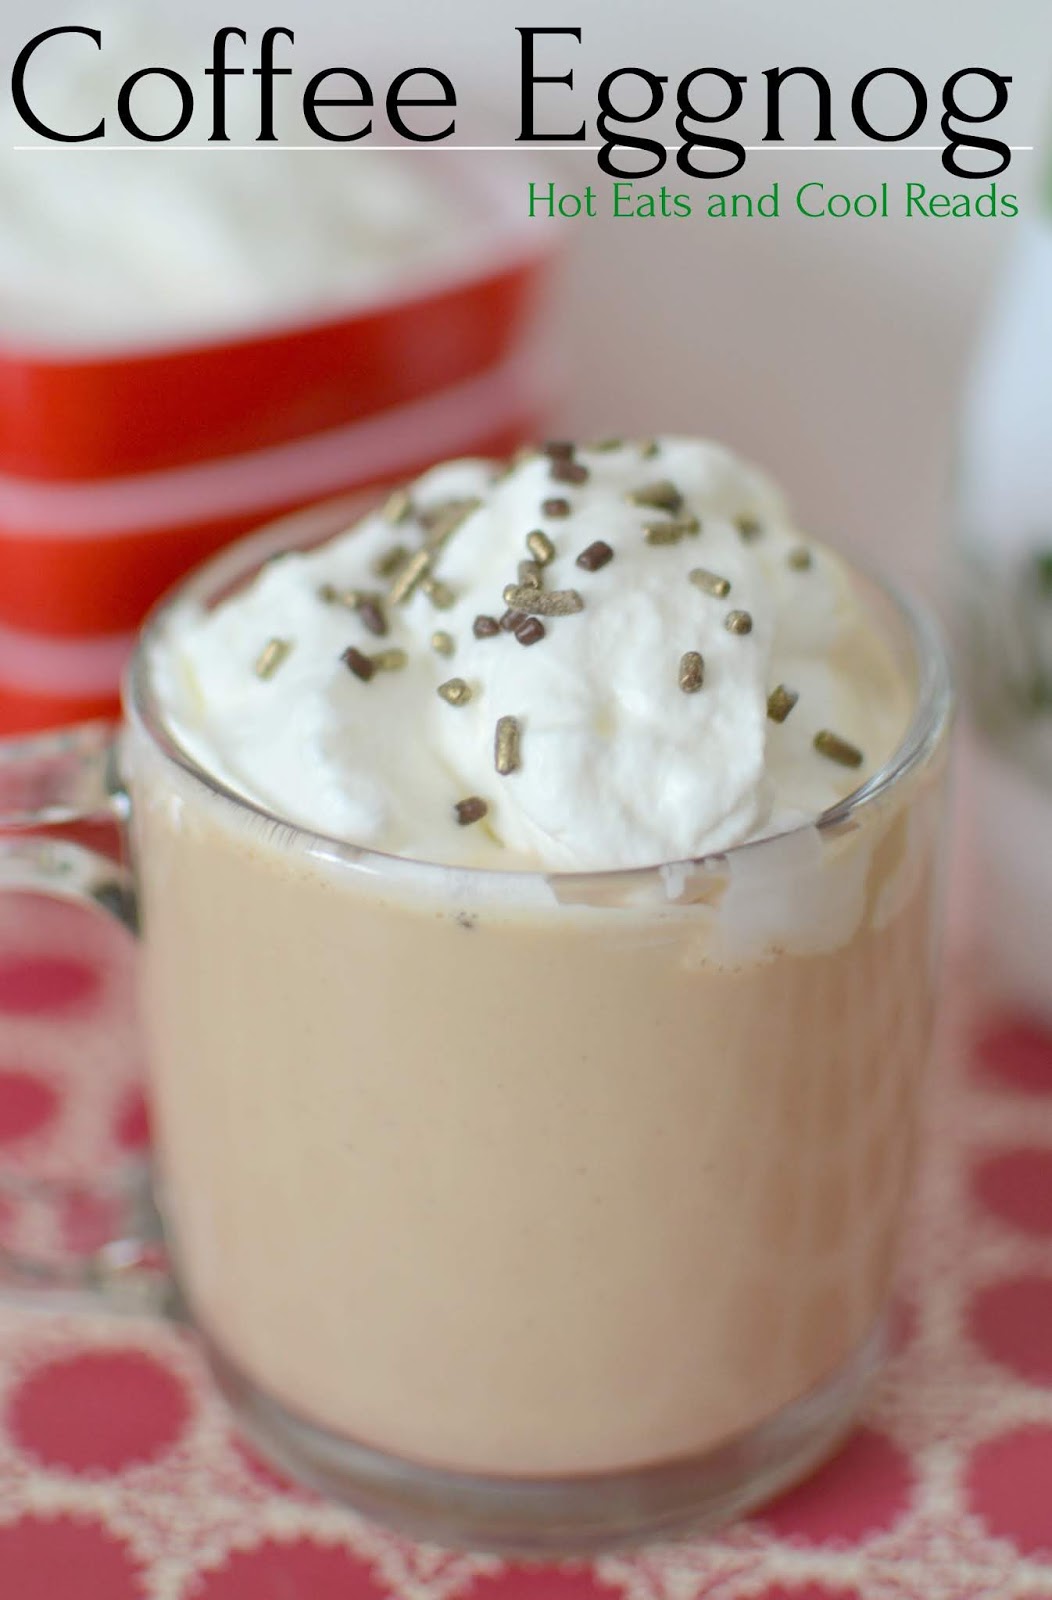 Hot Eats and Cool Reads: Coffee Eggnog Recipe